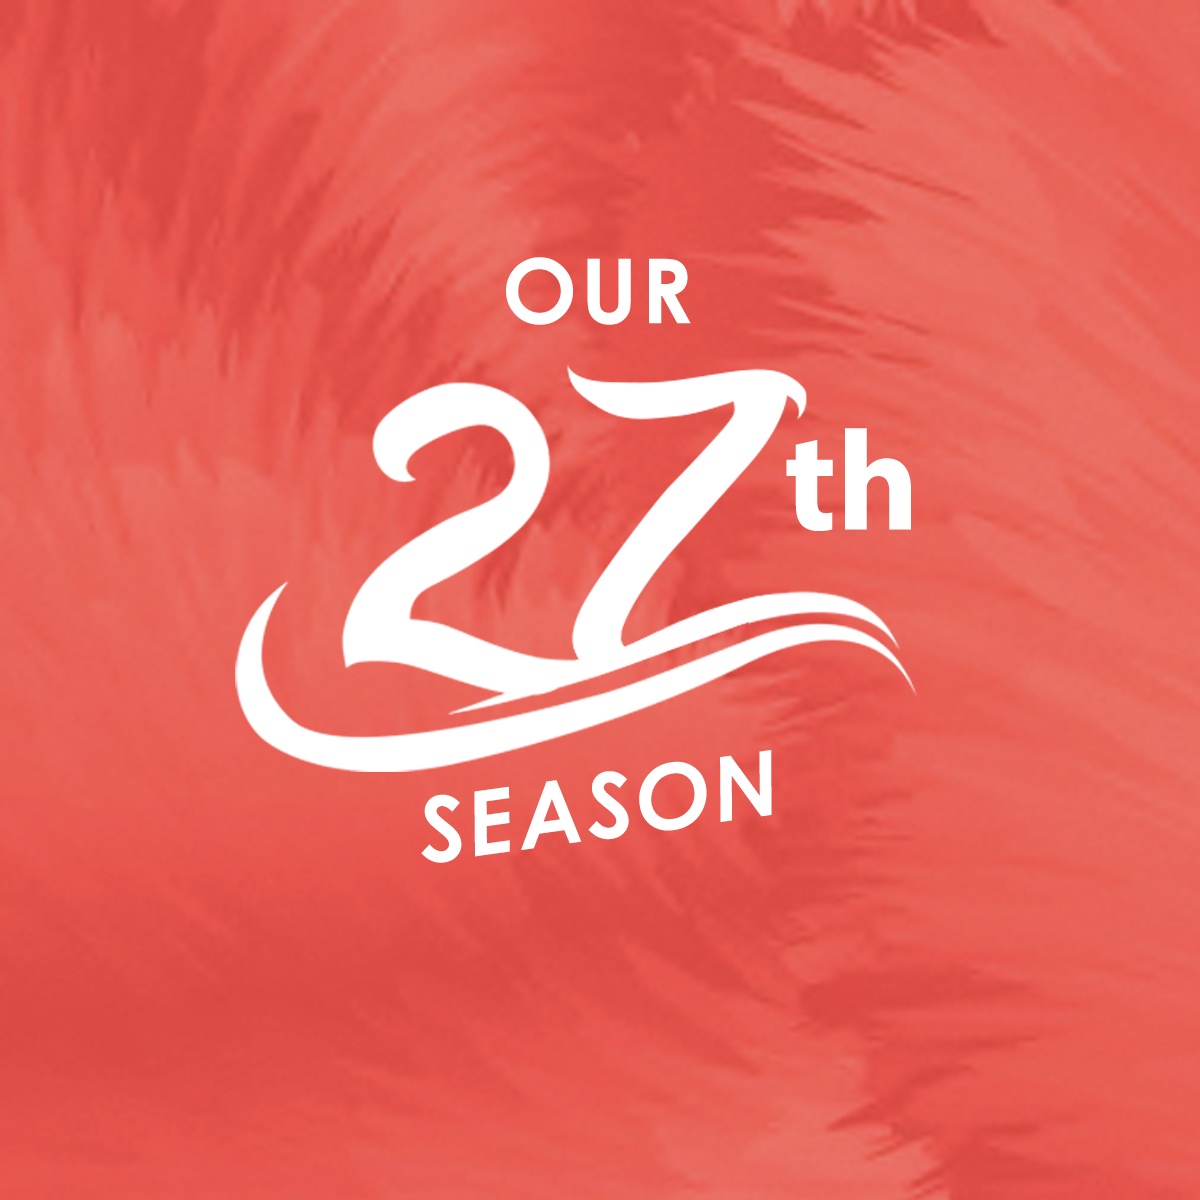 "Out 27th Season" displayed over an abstract swirling background.